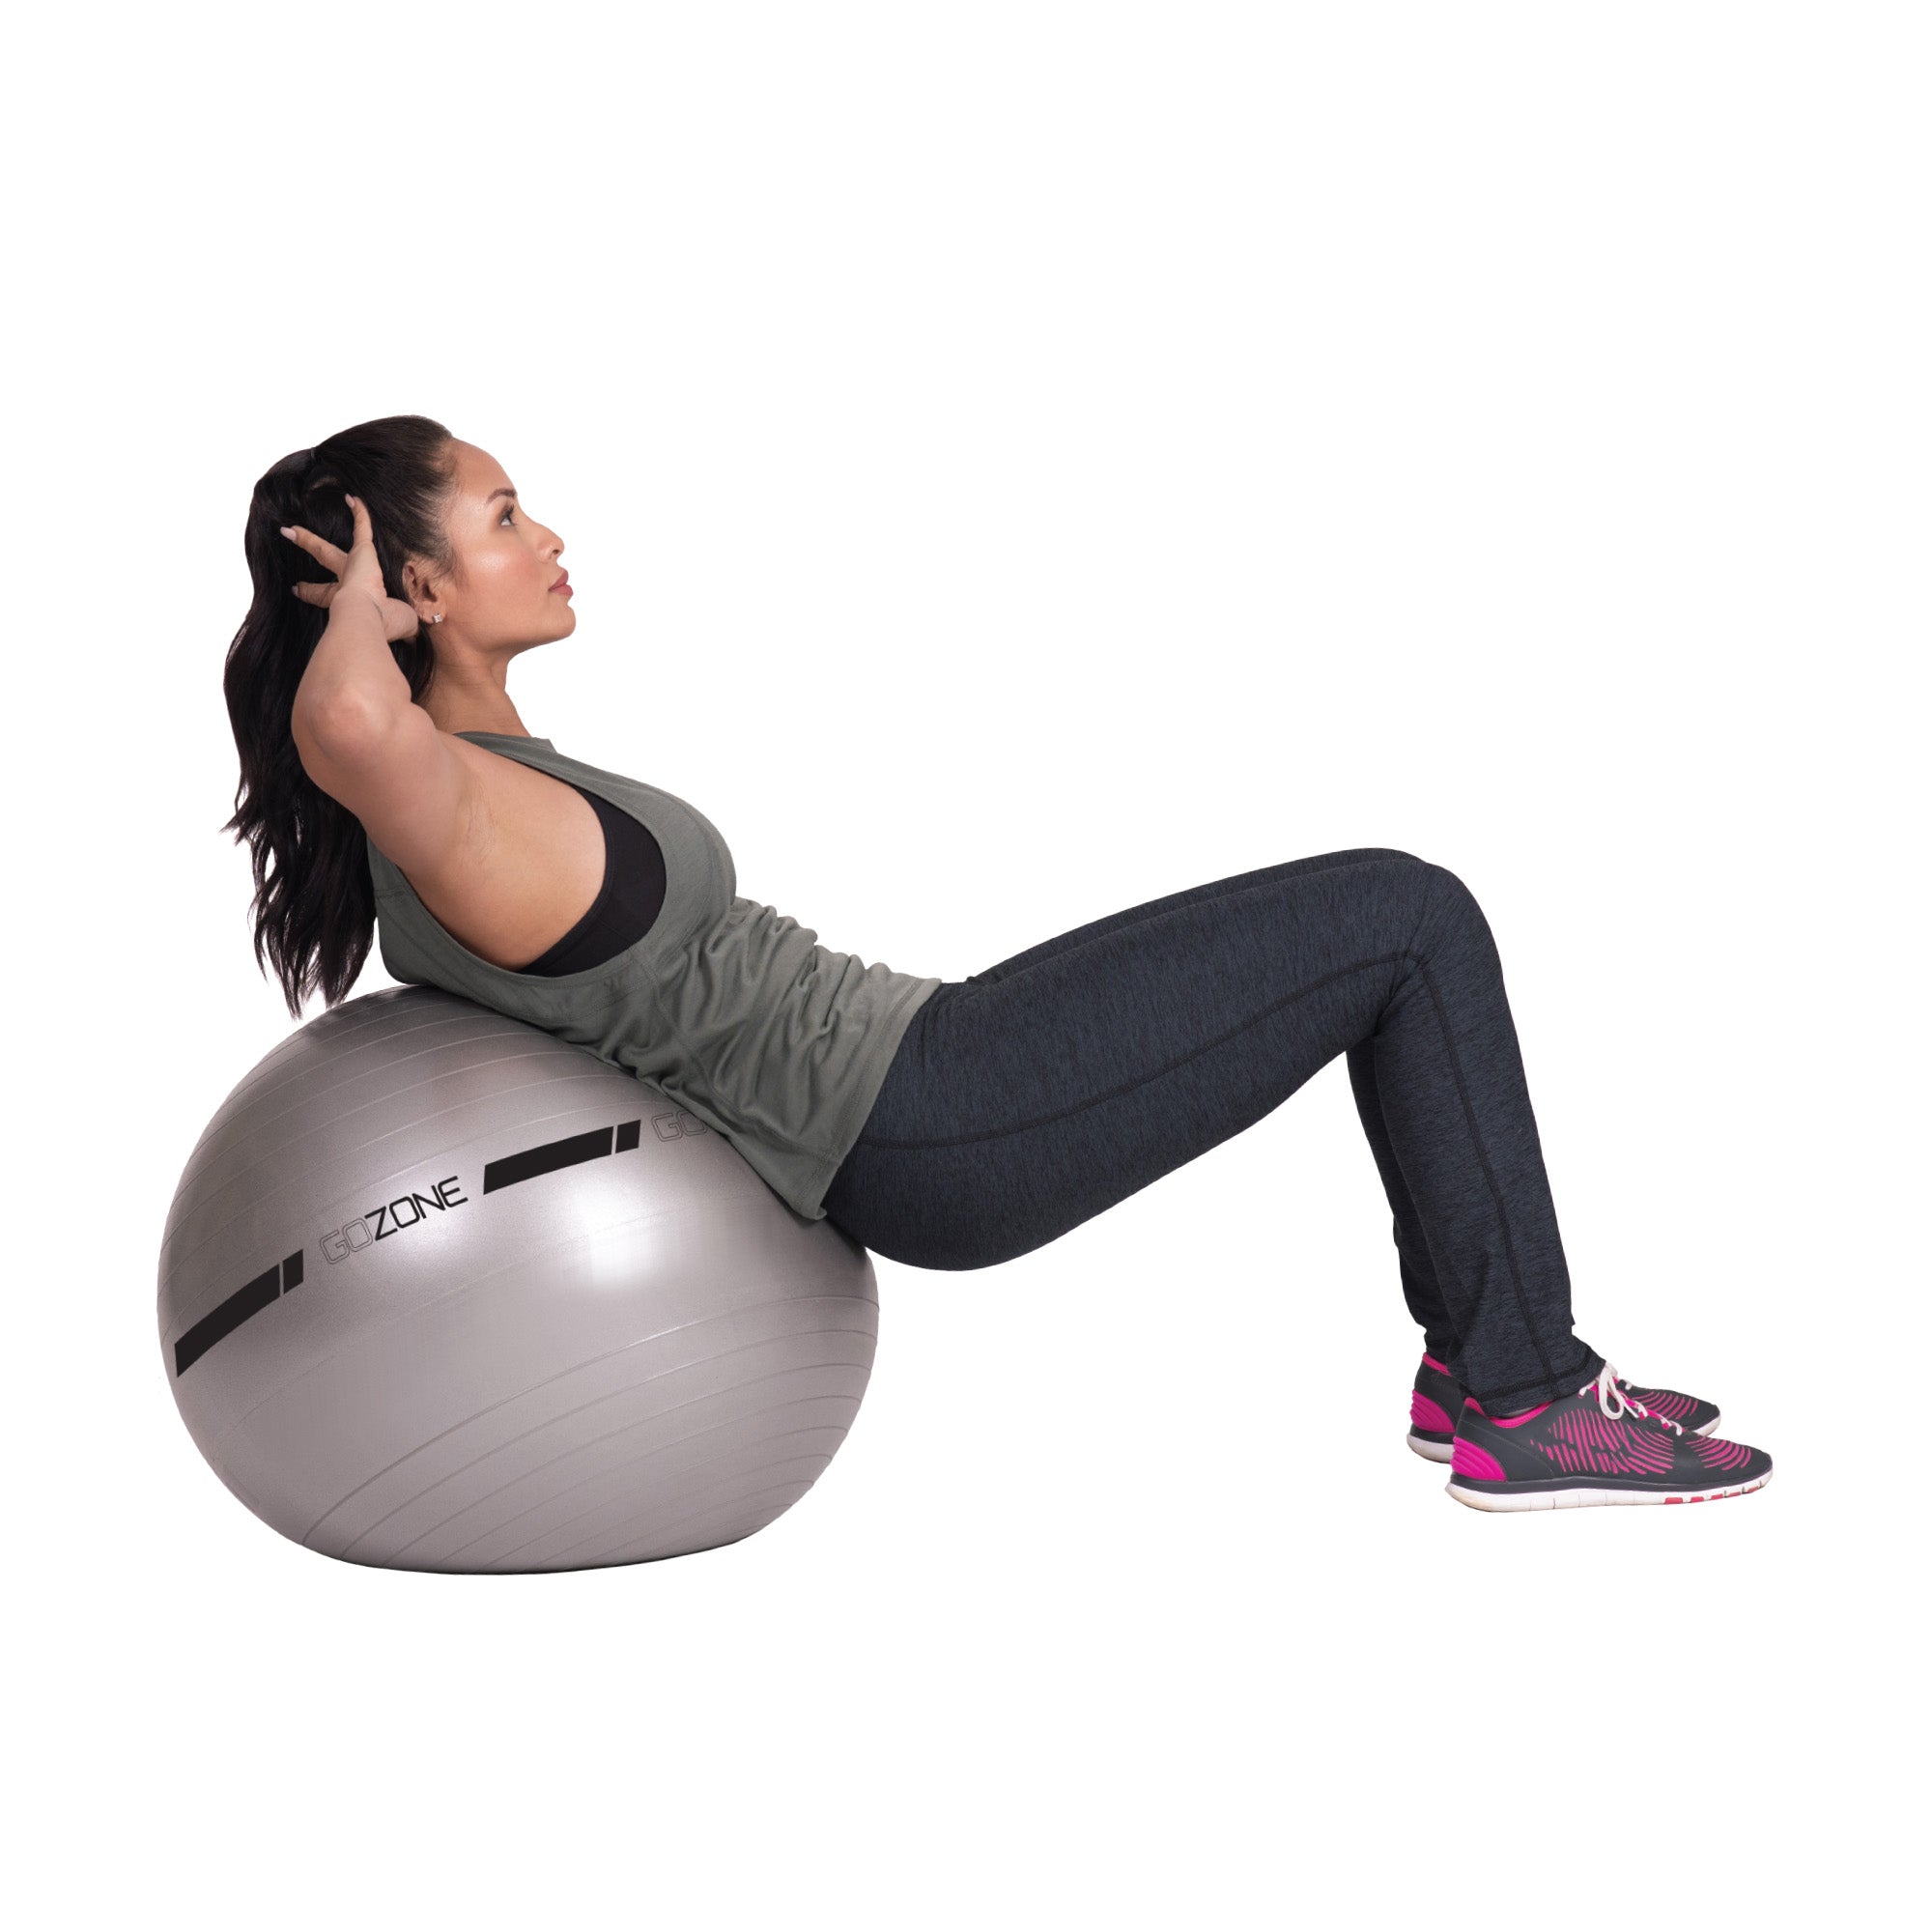 Vaupan Exercise Ball Yoga Ball for Home Gym, 65cm Stability Ball for  Workout Fitness, Anti-Burst, Slip Resistant Balance Ball Chair for Office,  Swiss